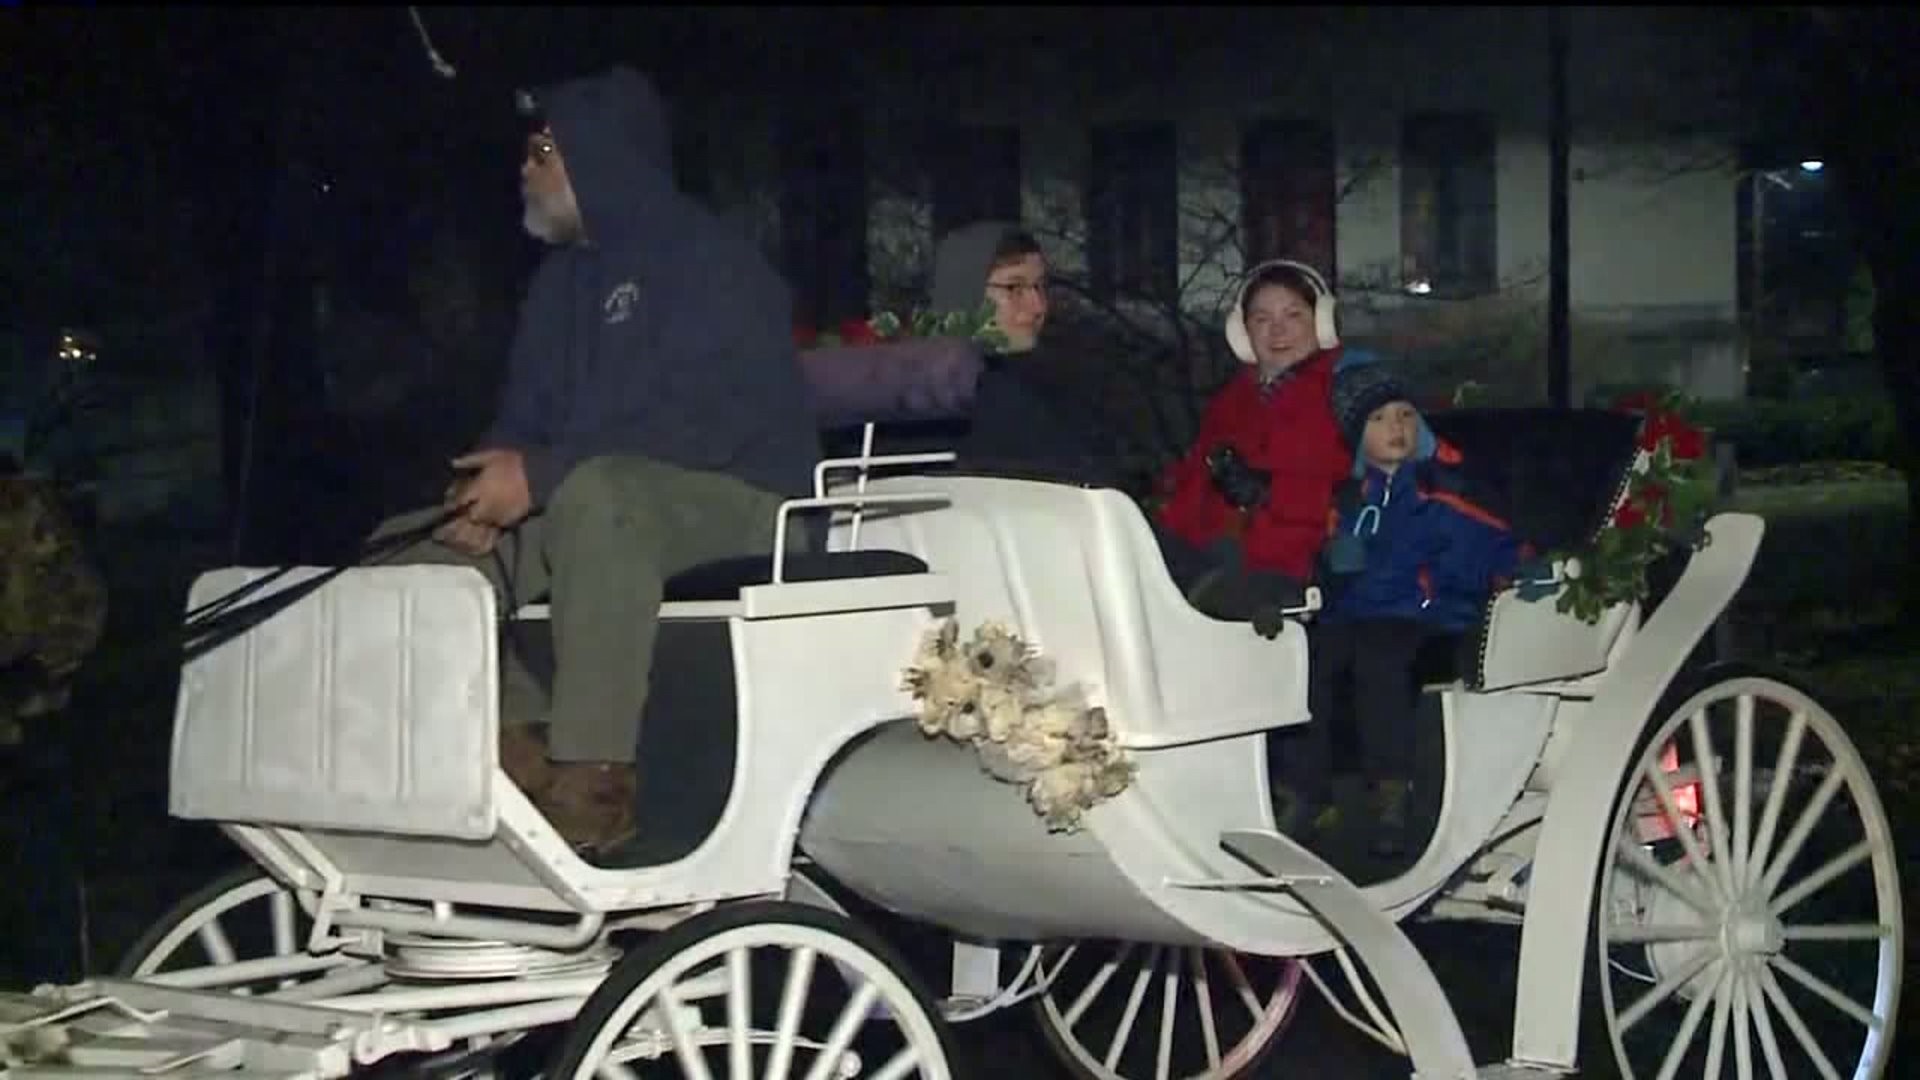 Carriage Rides in Nay Aug Park